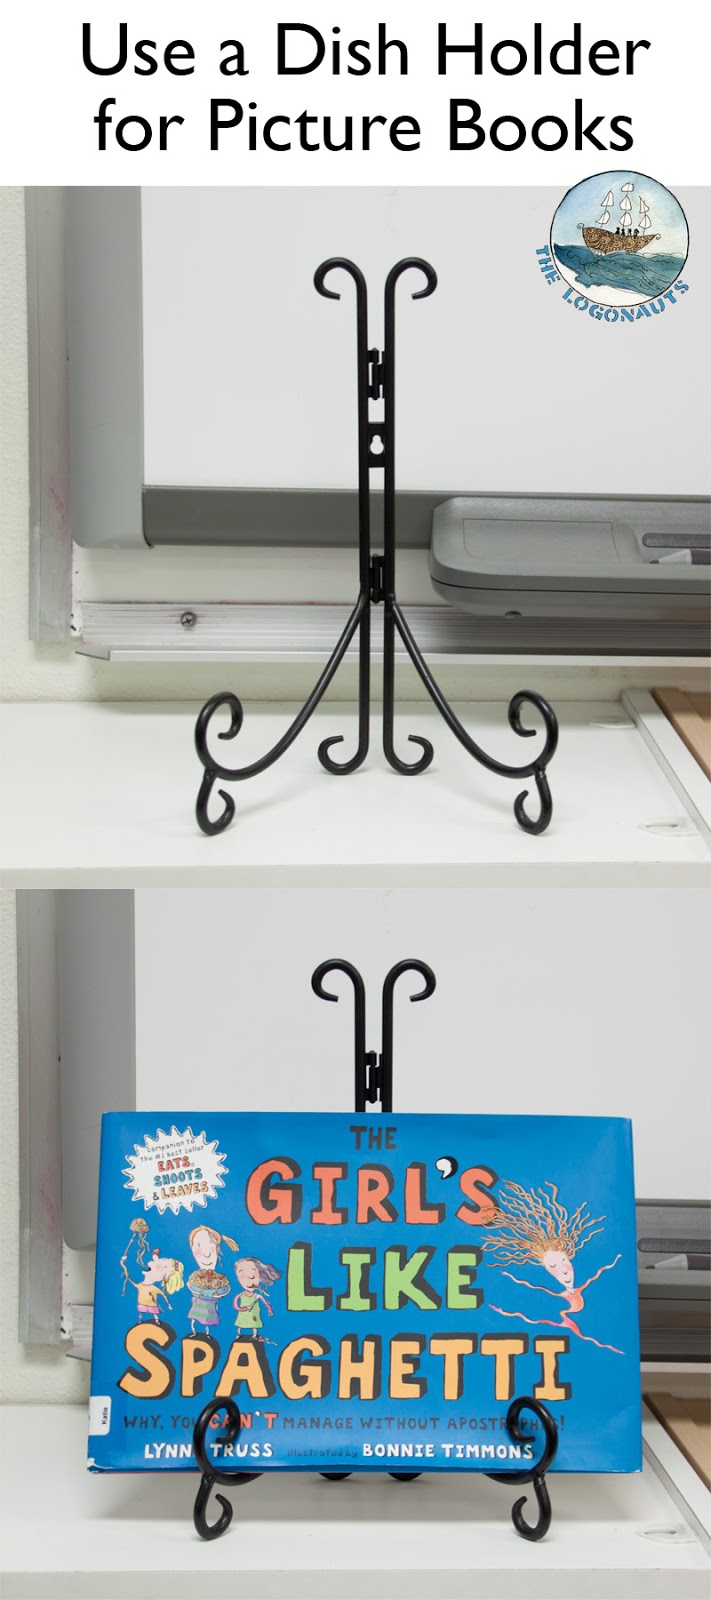 Use a Dish Holder for Picture Books - Organizing a Classroom Library | The Logonauts